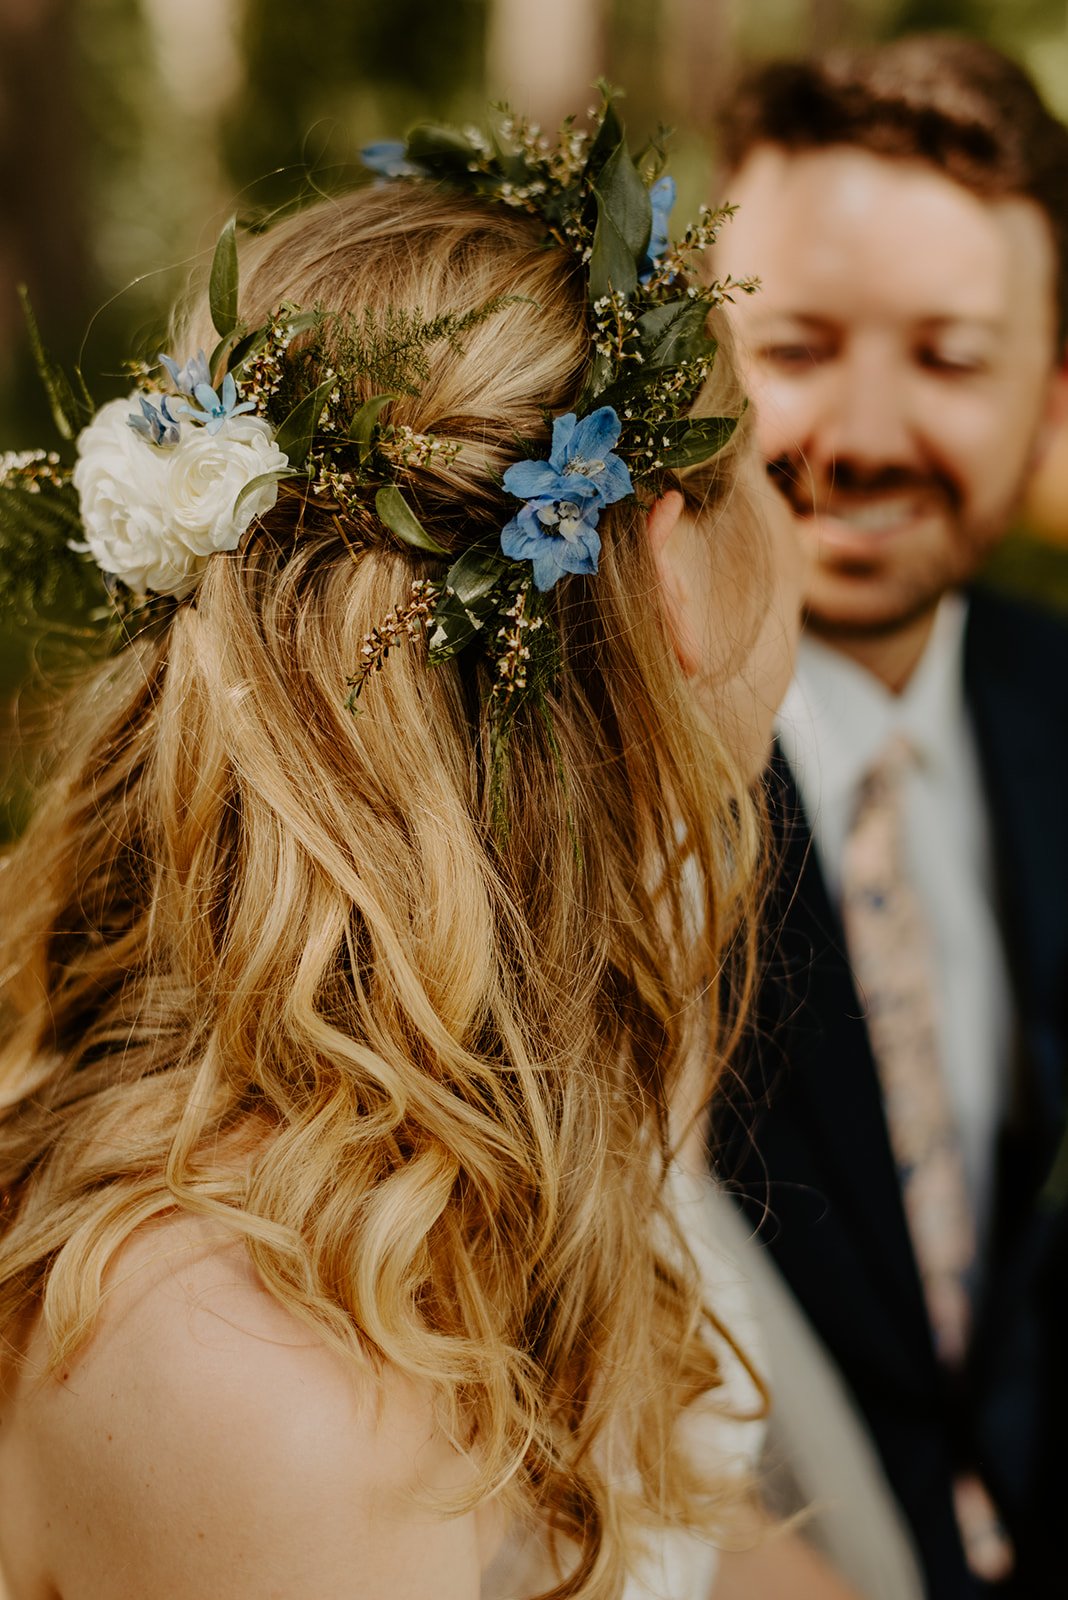 Iris' hair flowers were made up of a greenery and floral crown with a comb to sit at the back.